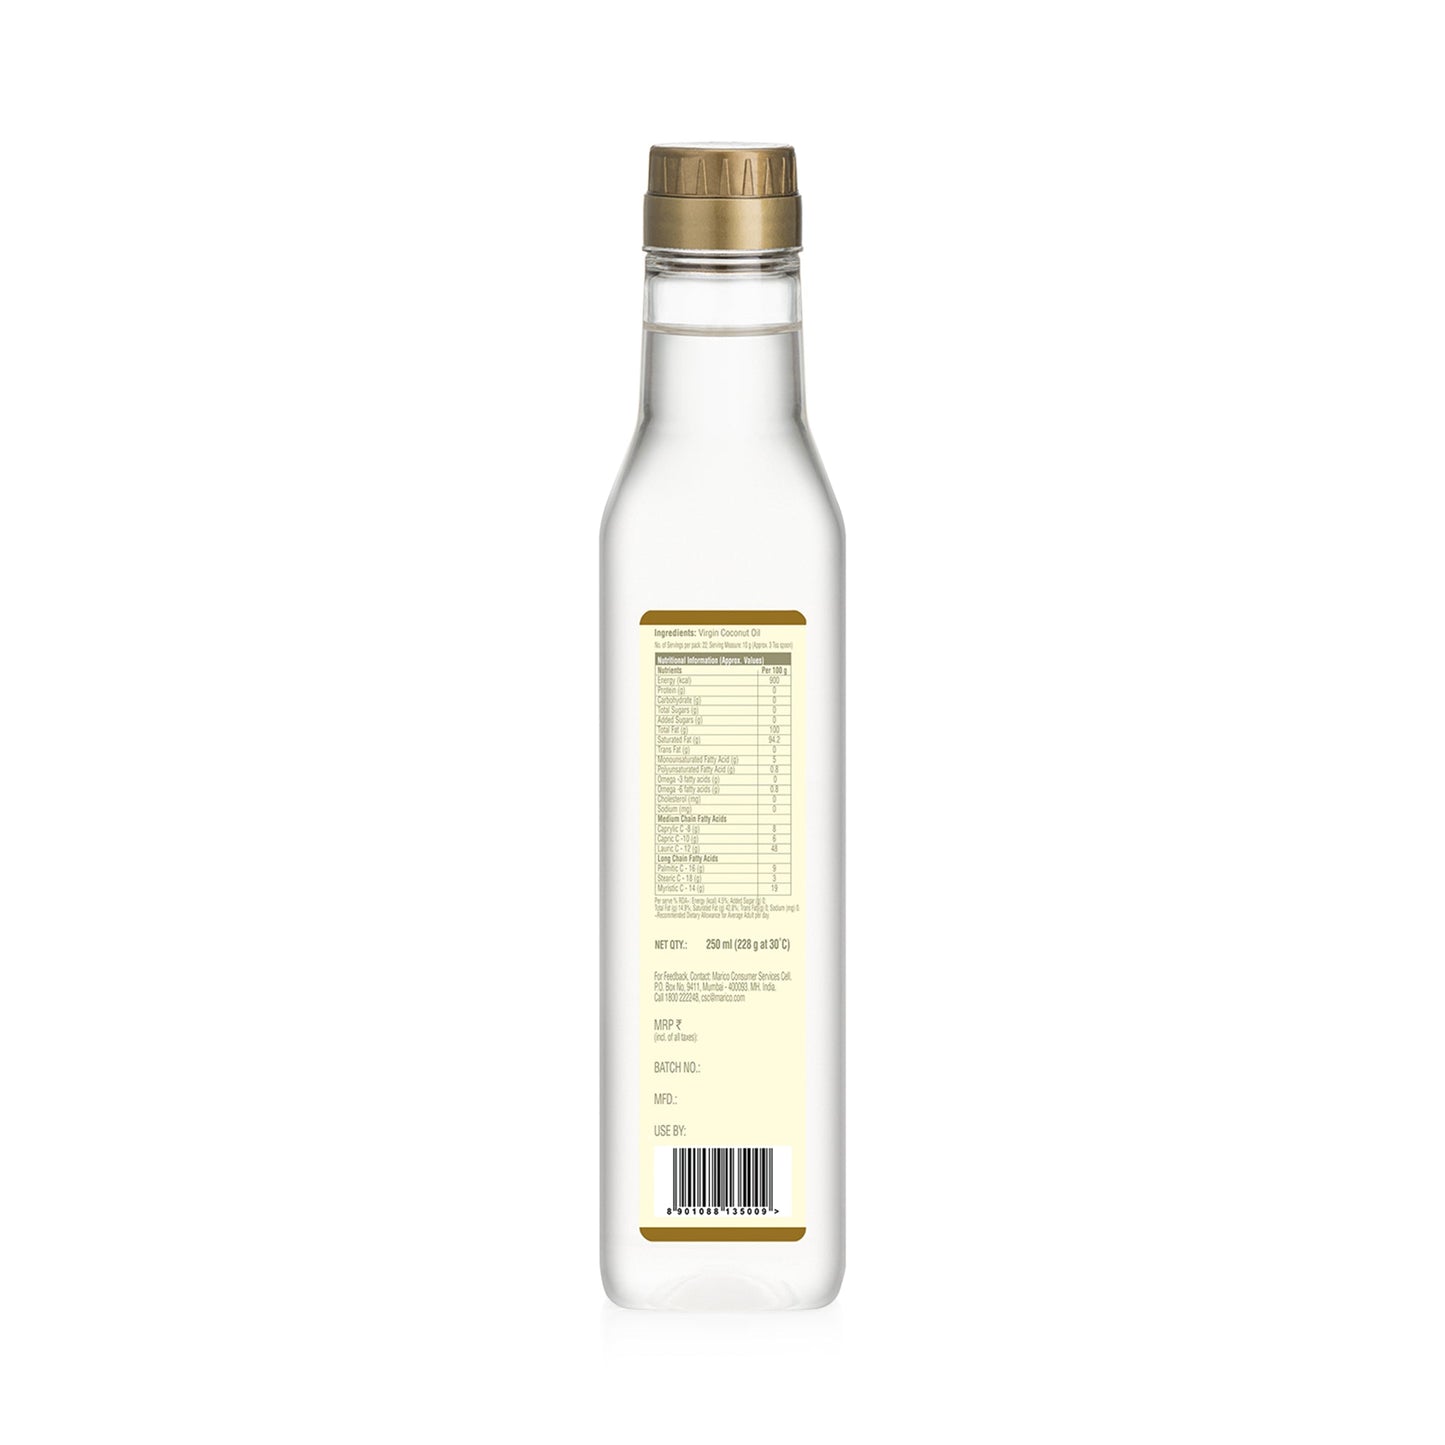 Cold Pressed Natural Virgin Coconut Oil  From the makers of Parachute  250 ml